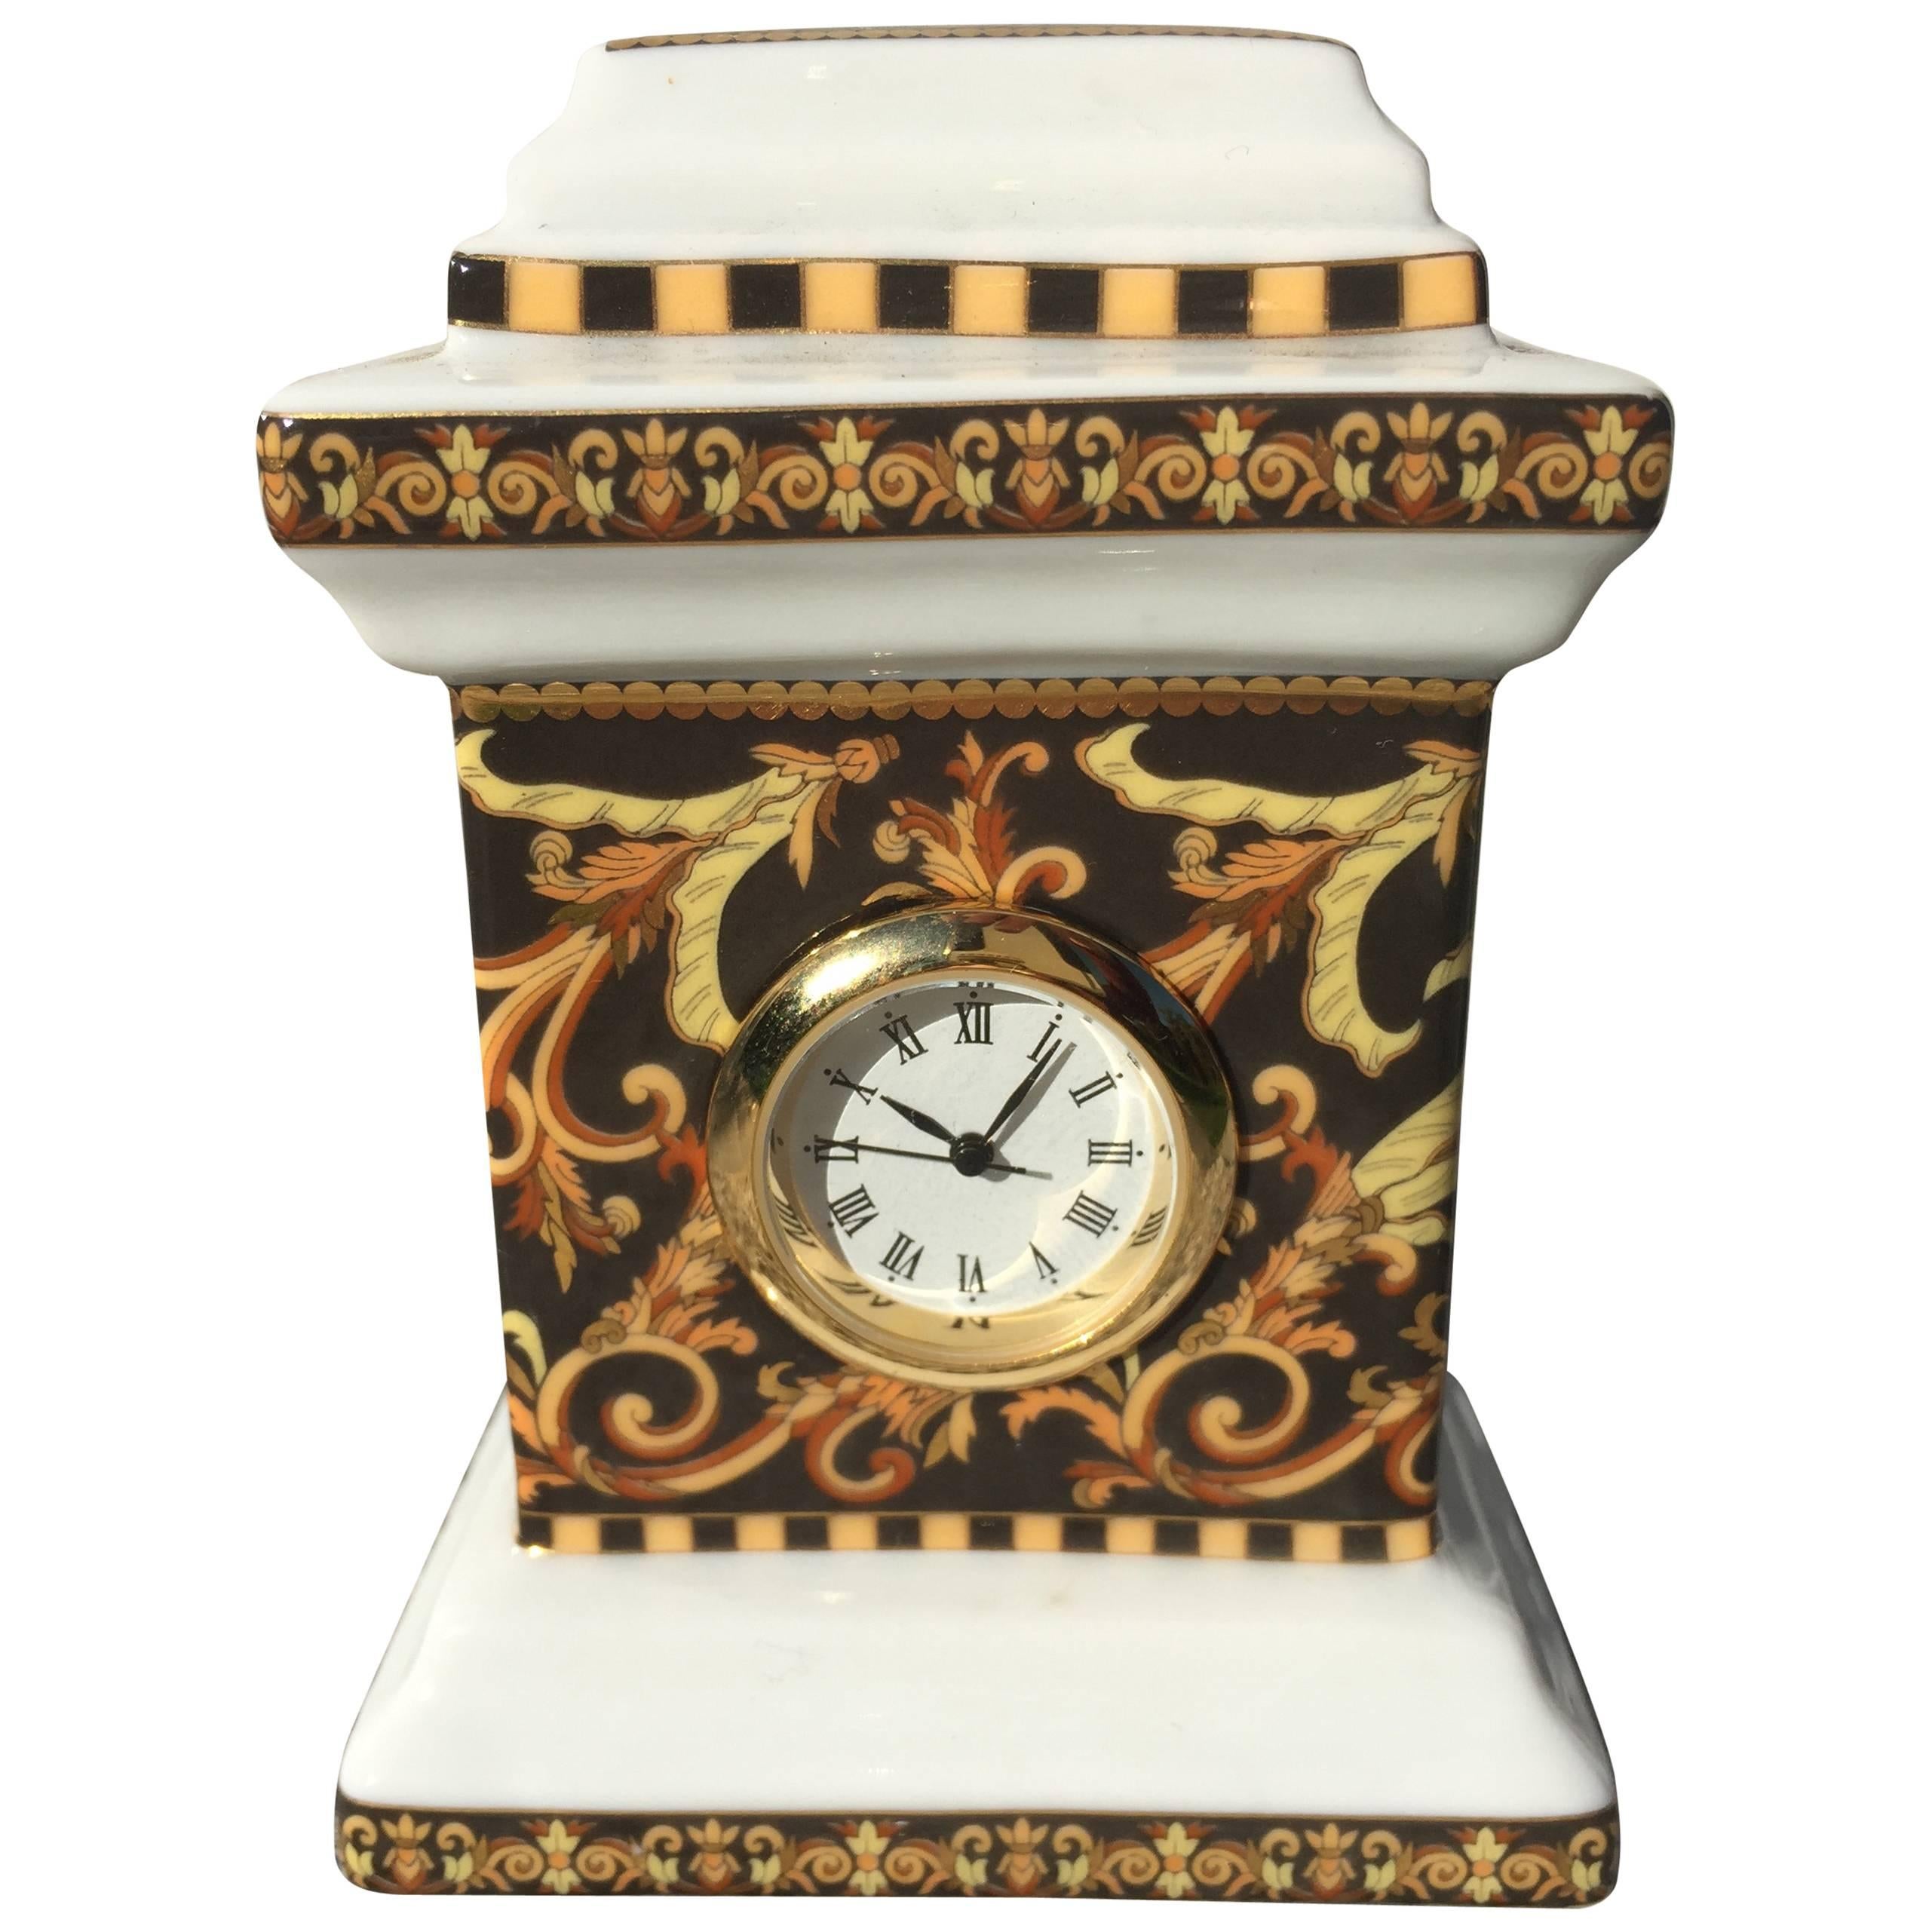 Versace "Barocco" Pattern Table Clock by Rosenthal Porcelain, Germany